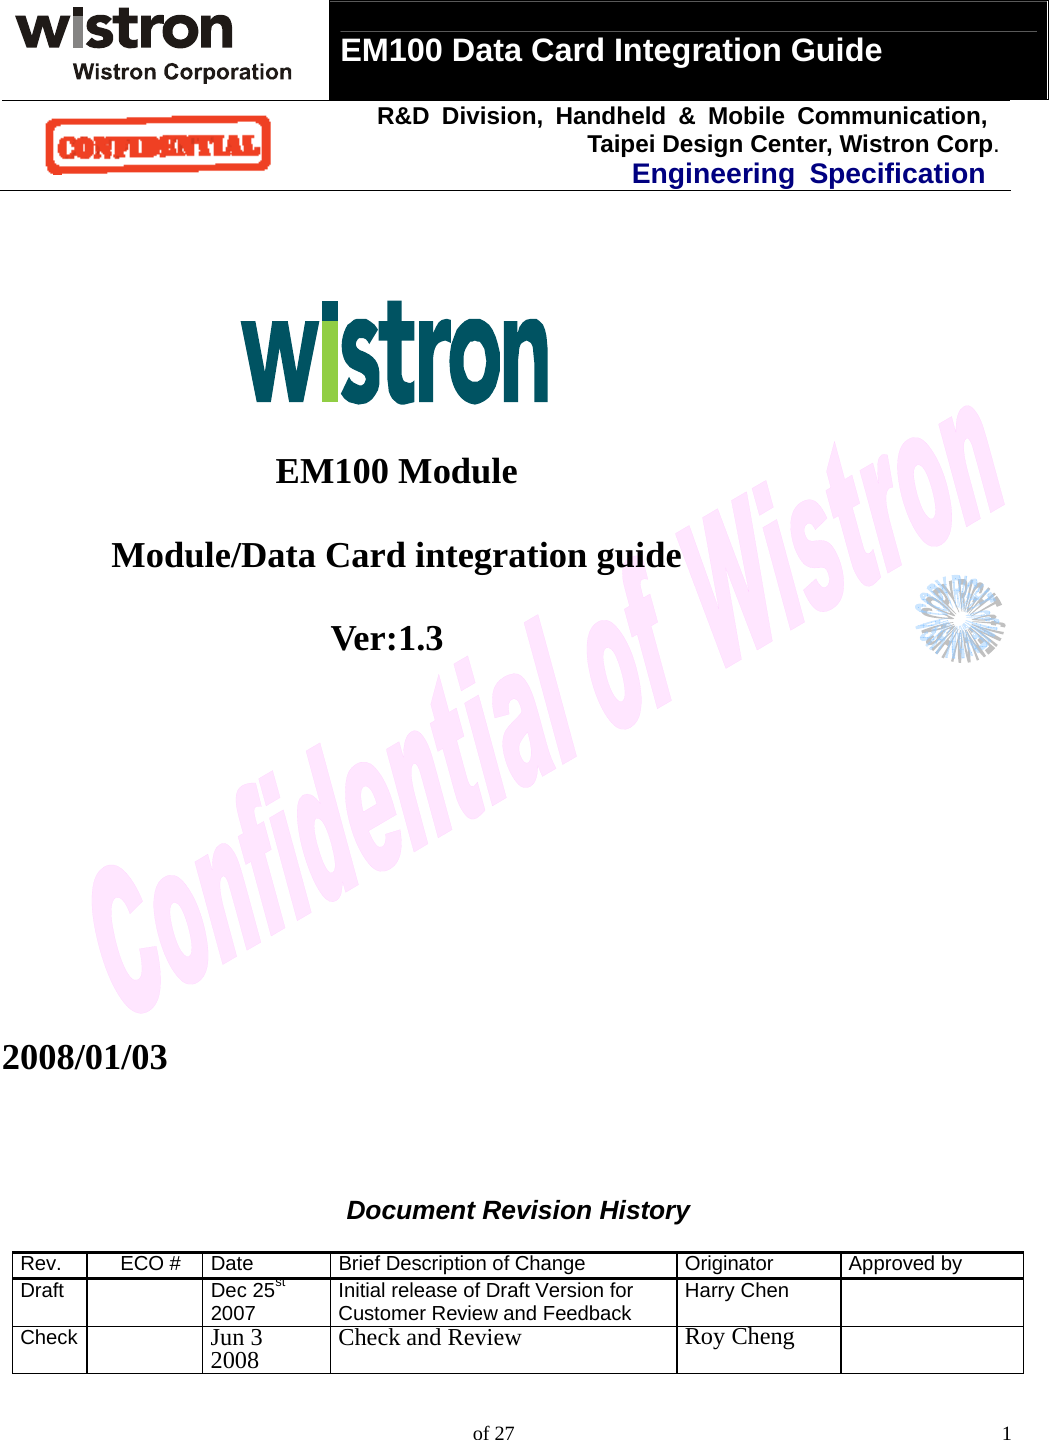  EM100 Data Card Integration Guide   R&amp;D Division, Handheld &amp; Mobile Communication, Taipei Design Center, Wistron Corp.Engineering Specification    of 27  1                     EM100 Module        Module/Data Card integration guide                      Ver:1.3          2008/01/03       Document Revision History  Rev. ECO # Date Brief Description of Change Originator Approved by Draft  Dec 25st 2007 Initial release of Draft Version for Customer Review and Feedback Harry Chen  Check   Jun 32008 Check and Review  Roy Cheng   